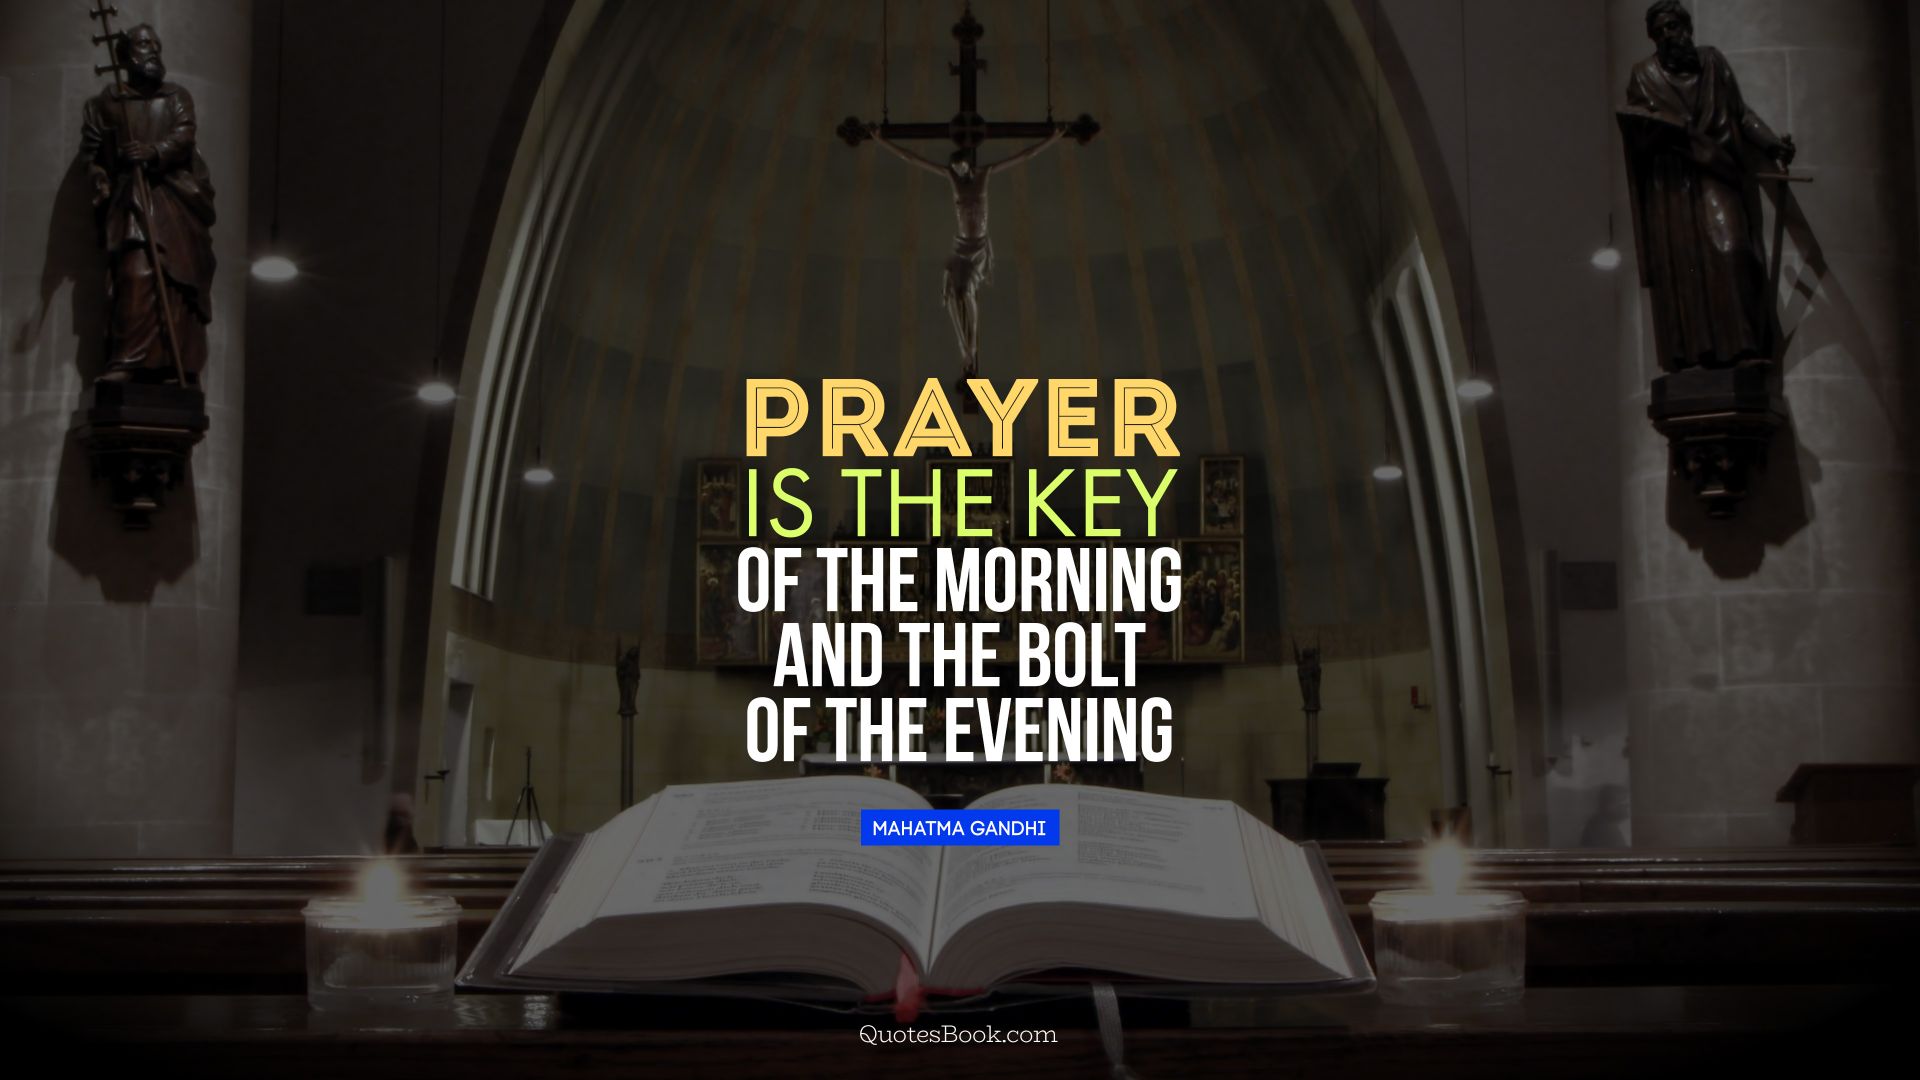 Prayer is the key of the morning and the bolt of the evening. - Quote by Mahatma Gandhi